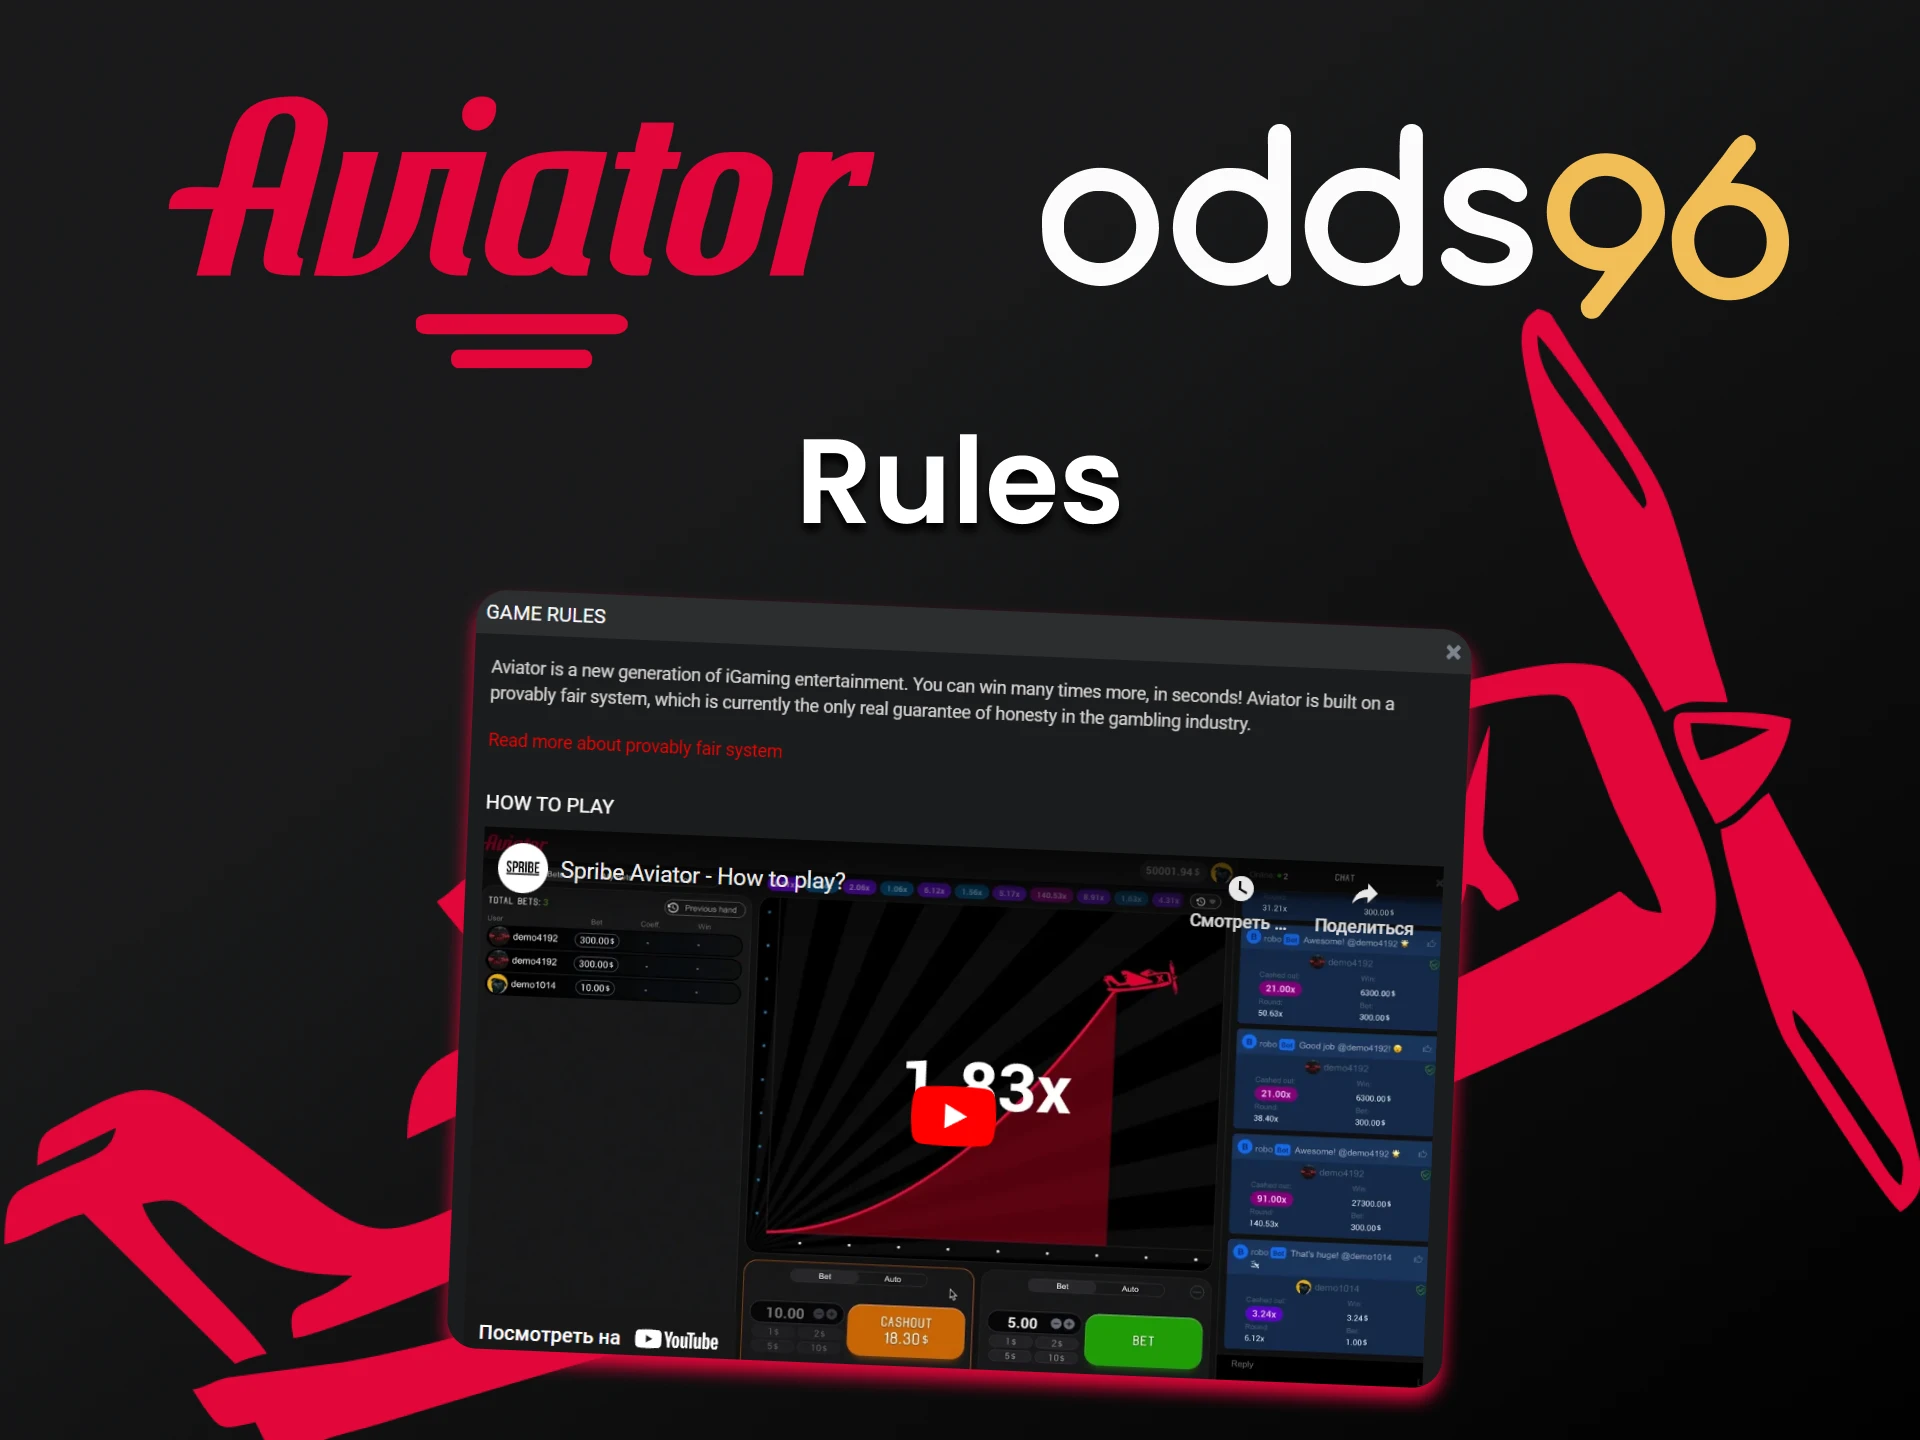 Try understand the rules of the game for winning Aviator at Odds96.